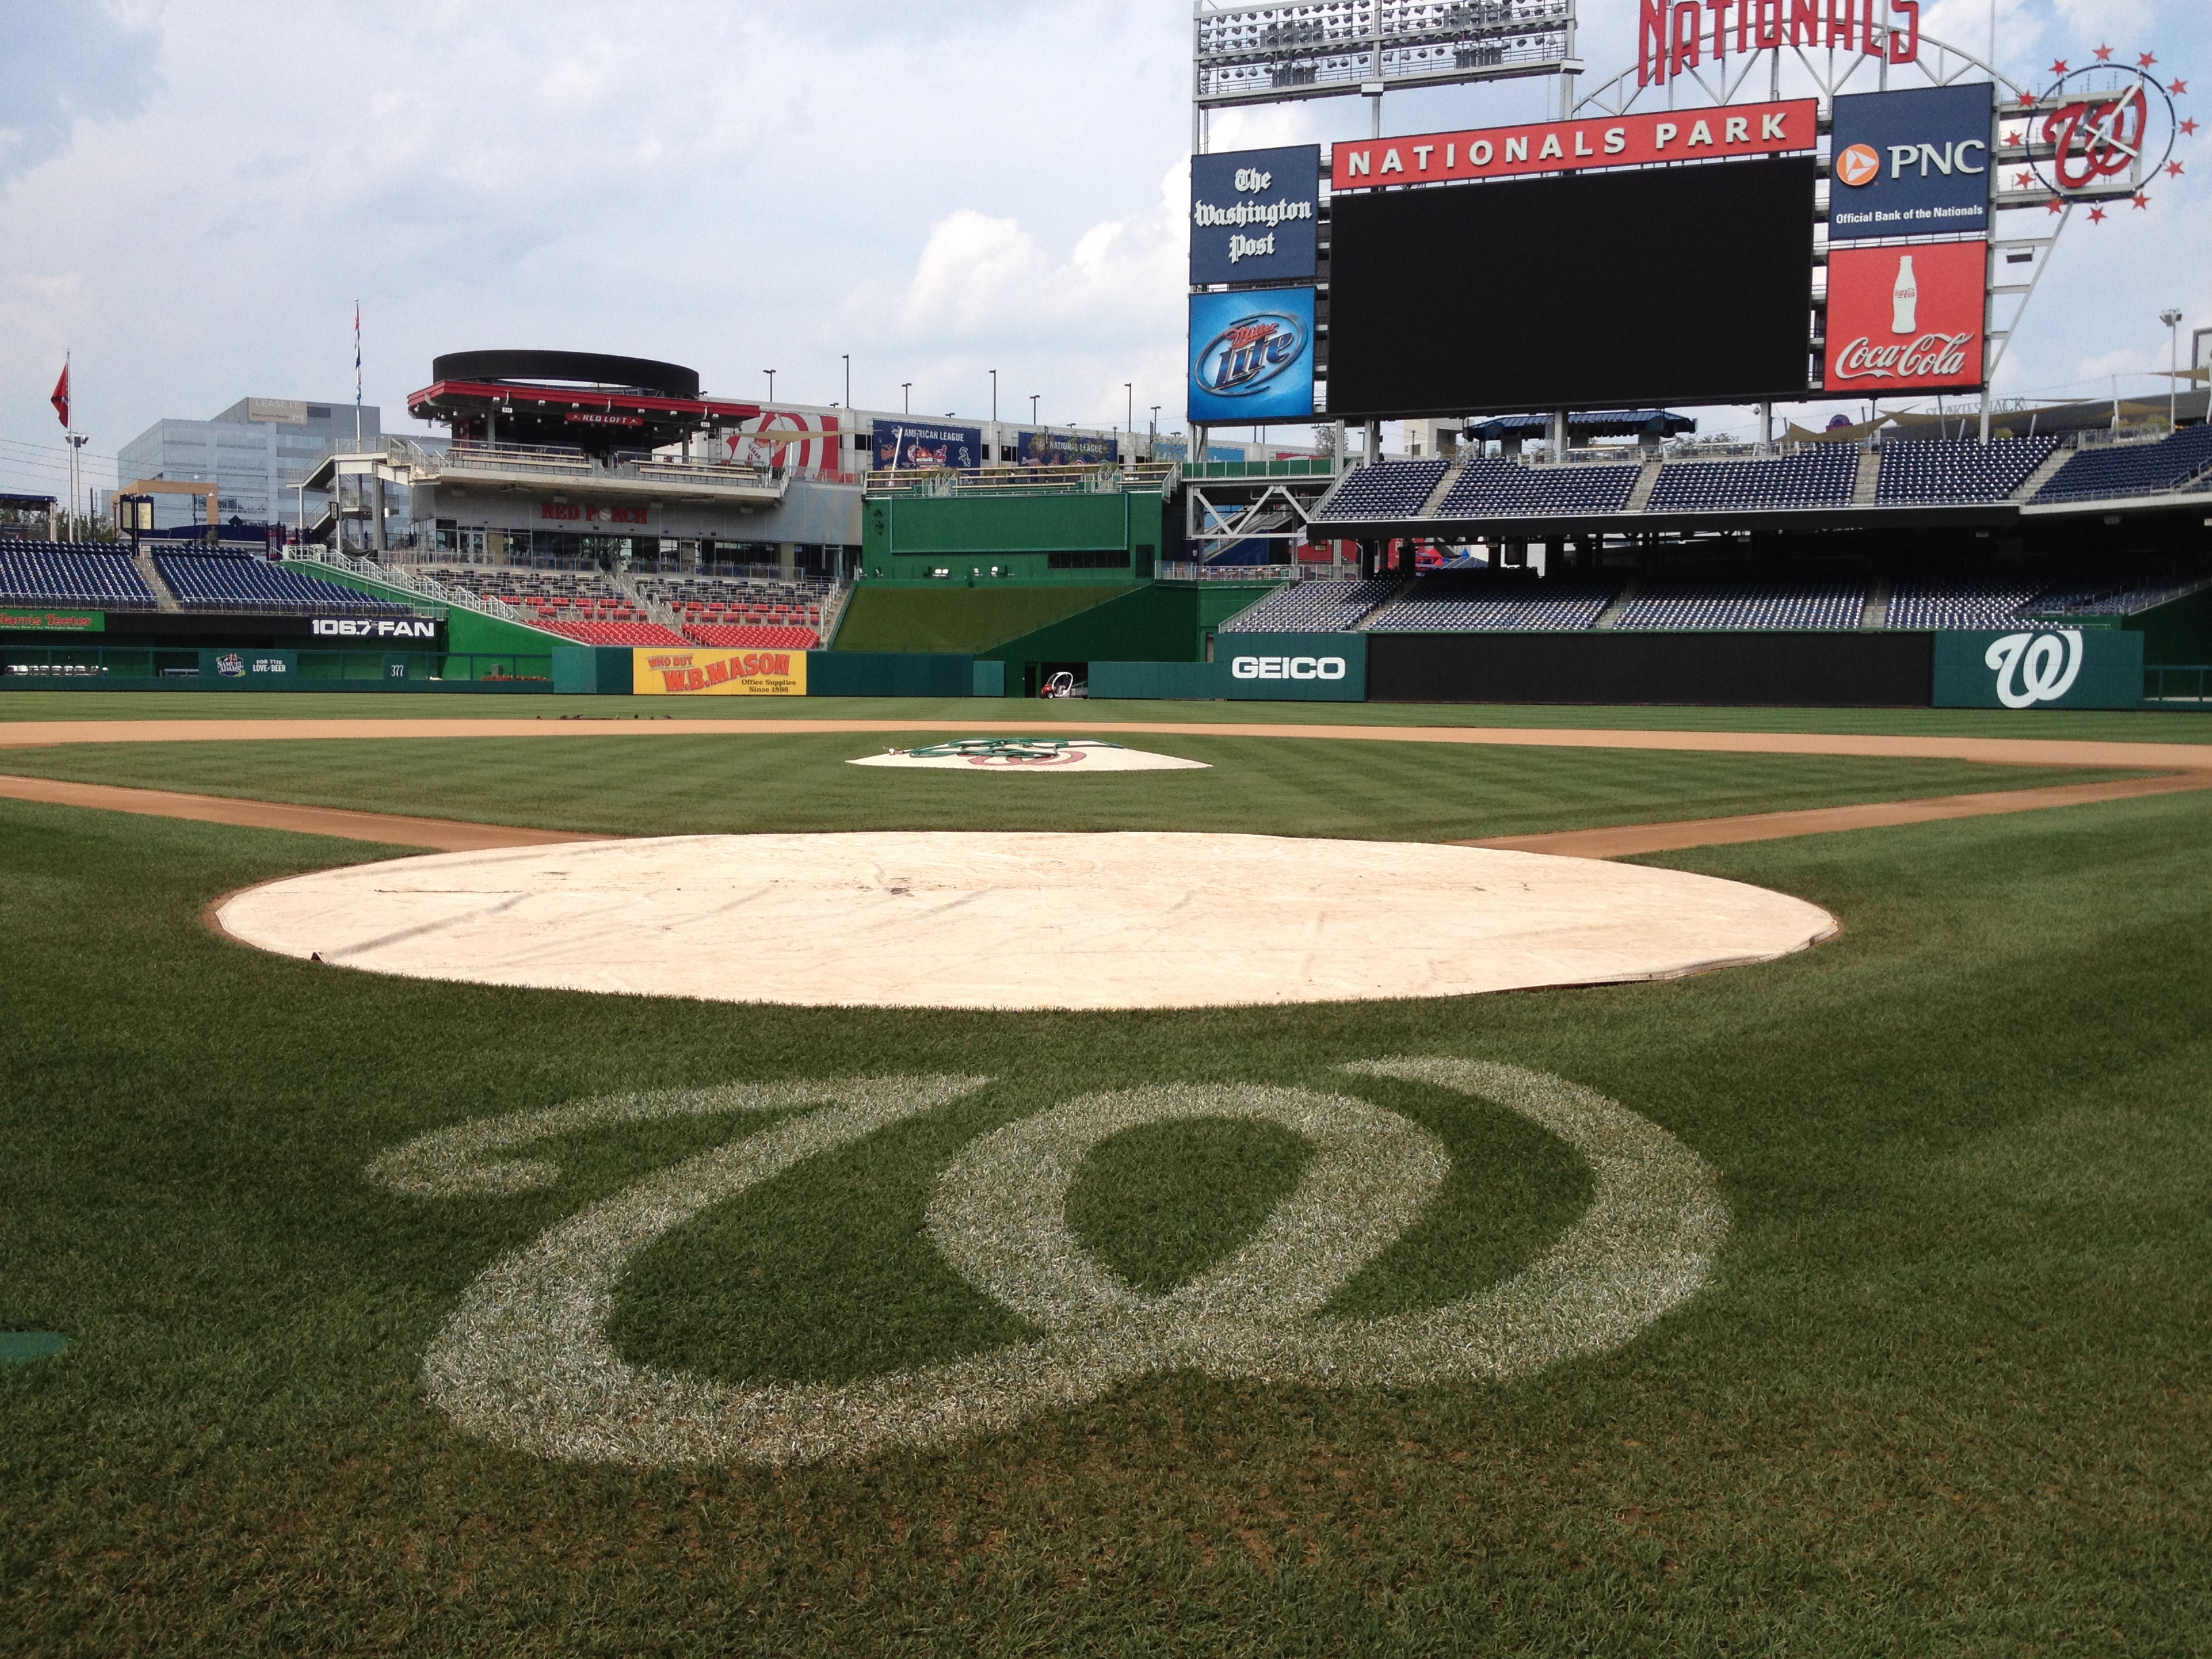 Nats Park View from Behind Home Plate